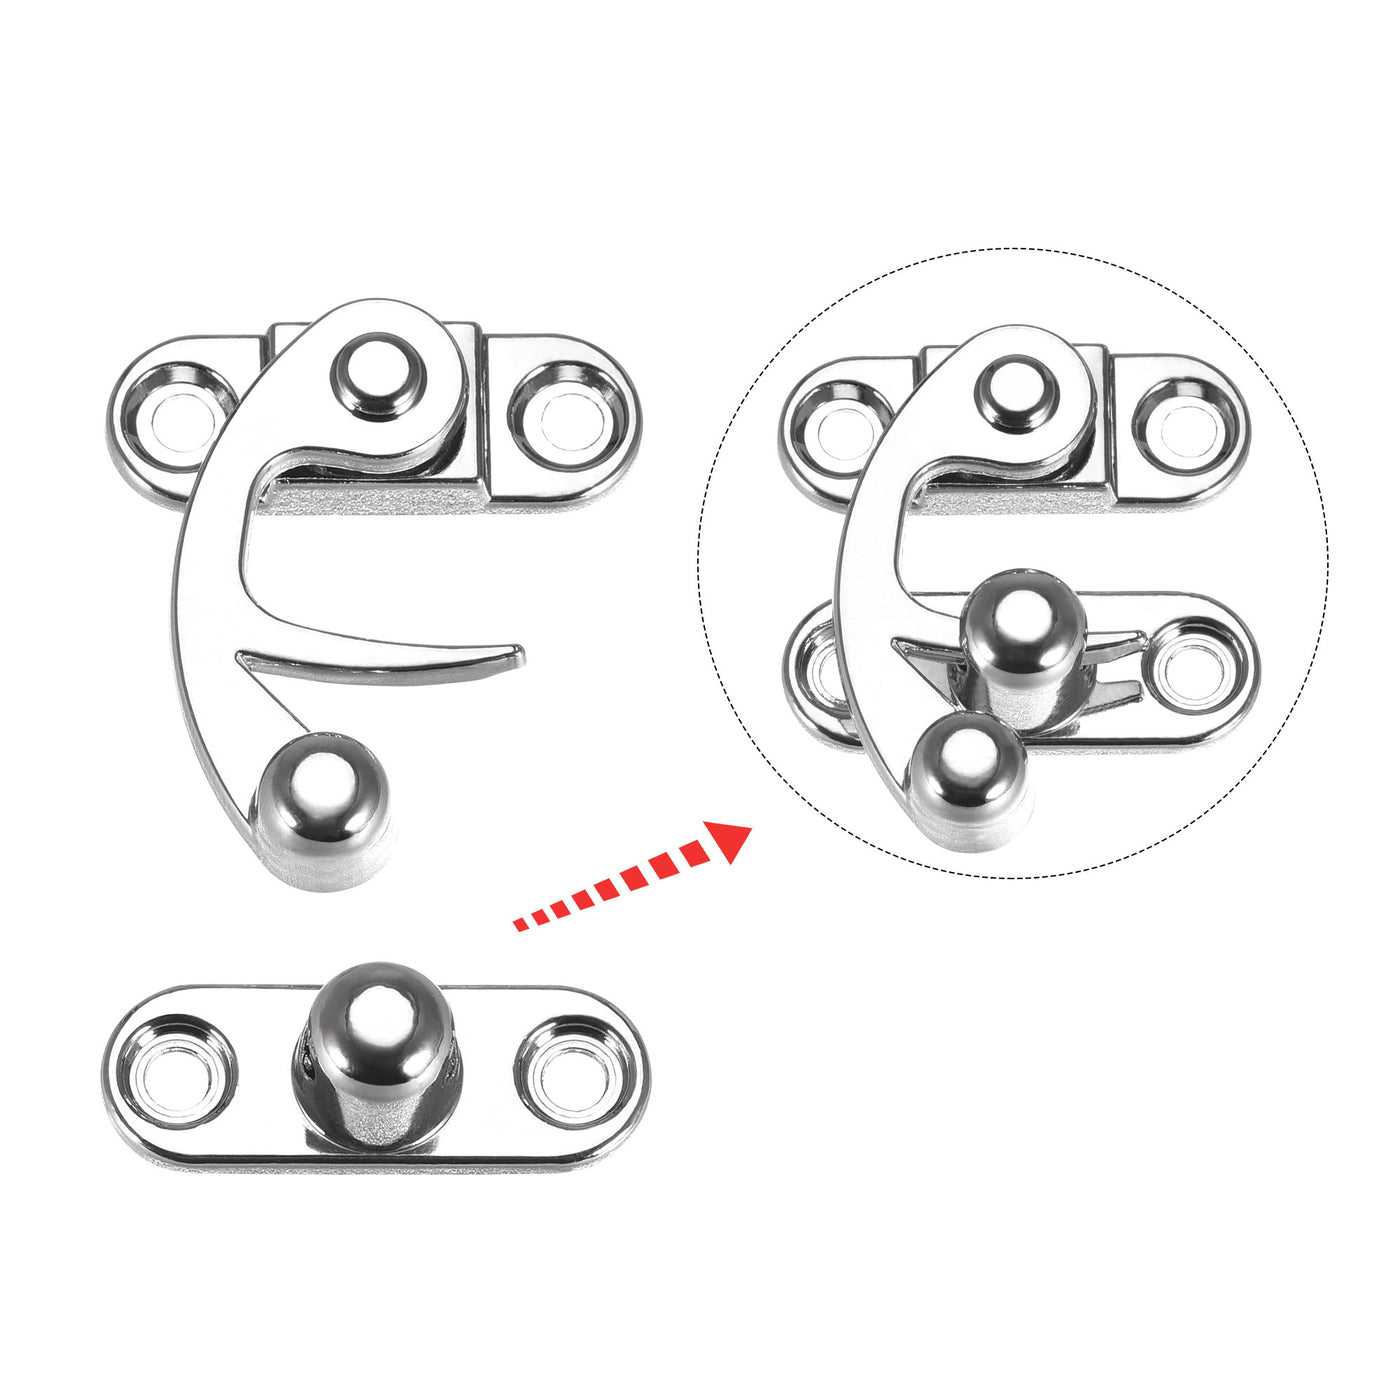 uxcell Uxcell Antique Vintage Lock Clasp Left Latch Hook Hasp 33mmx28mm Swing Arm Latch Silver Tone 5 Pcs